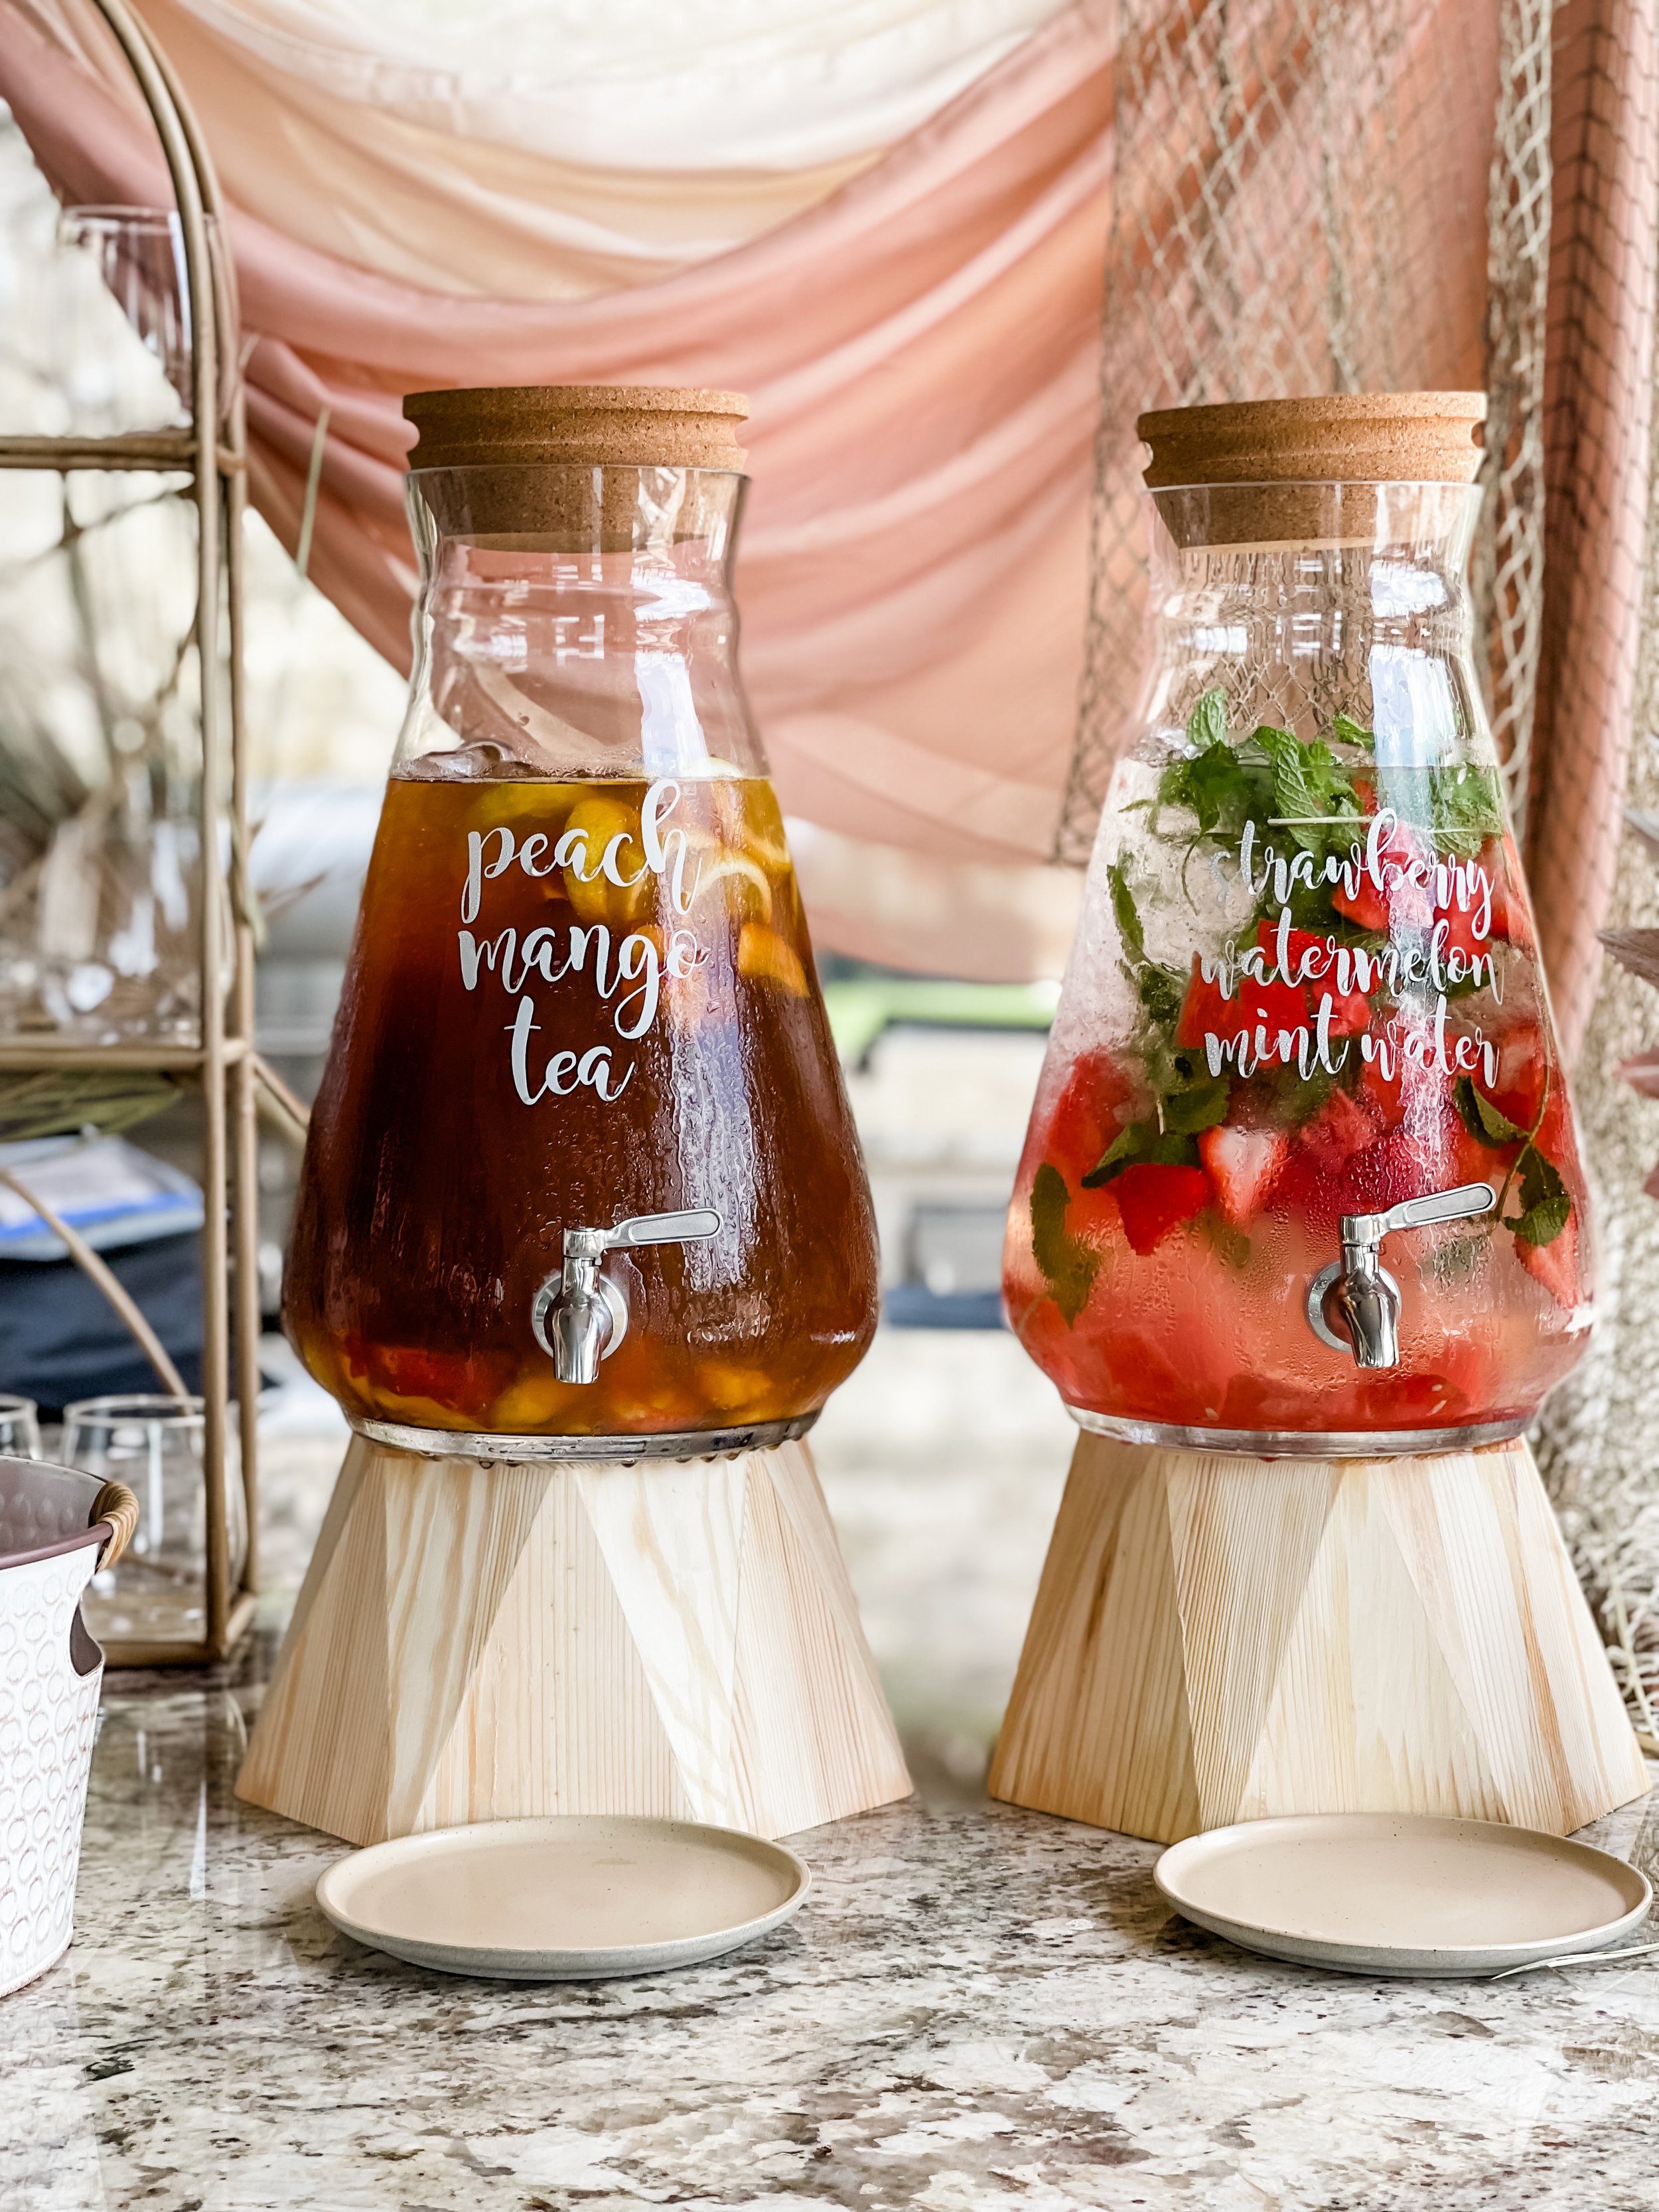  Beachy bar decor - Host a stylish and relaxed Tulum beach-inspired Baby Shower with these ideas for food bar, drink station, picnic style seating, decor and more from event designer Carolina of MINT Event Design in Austin, Texas. Get details and ton